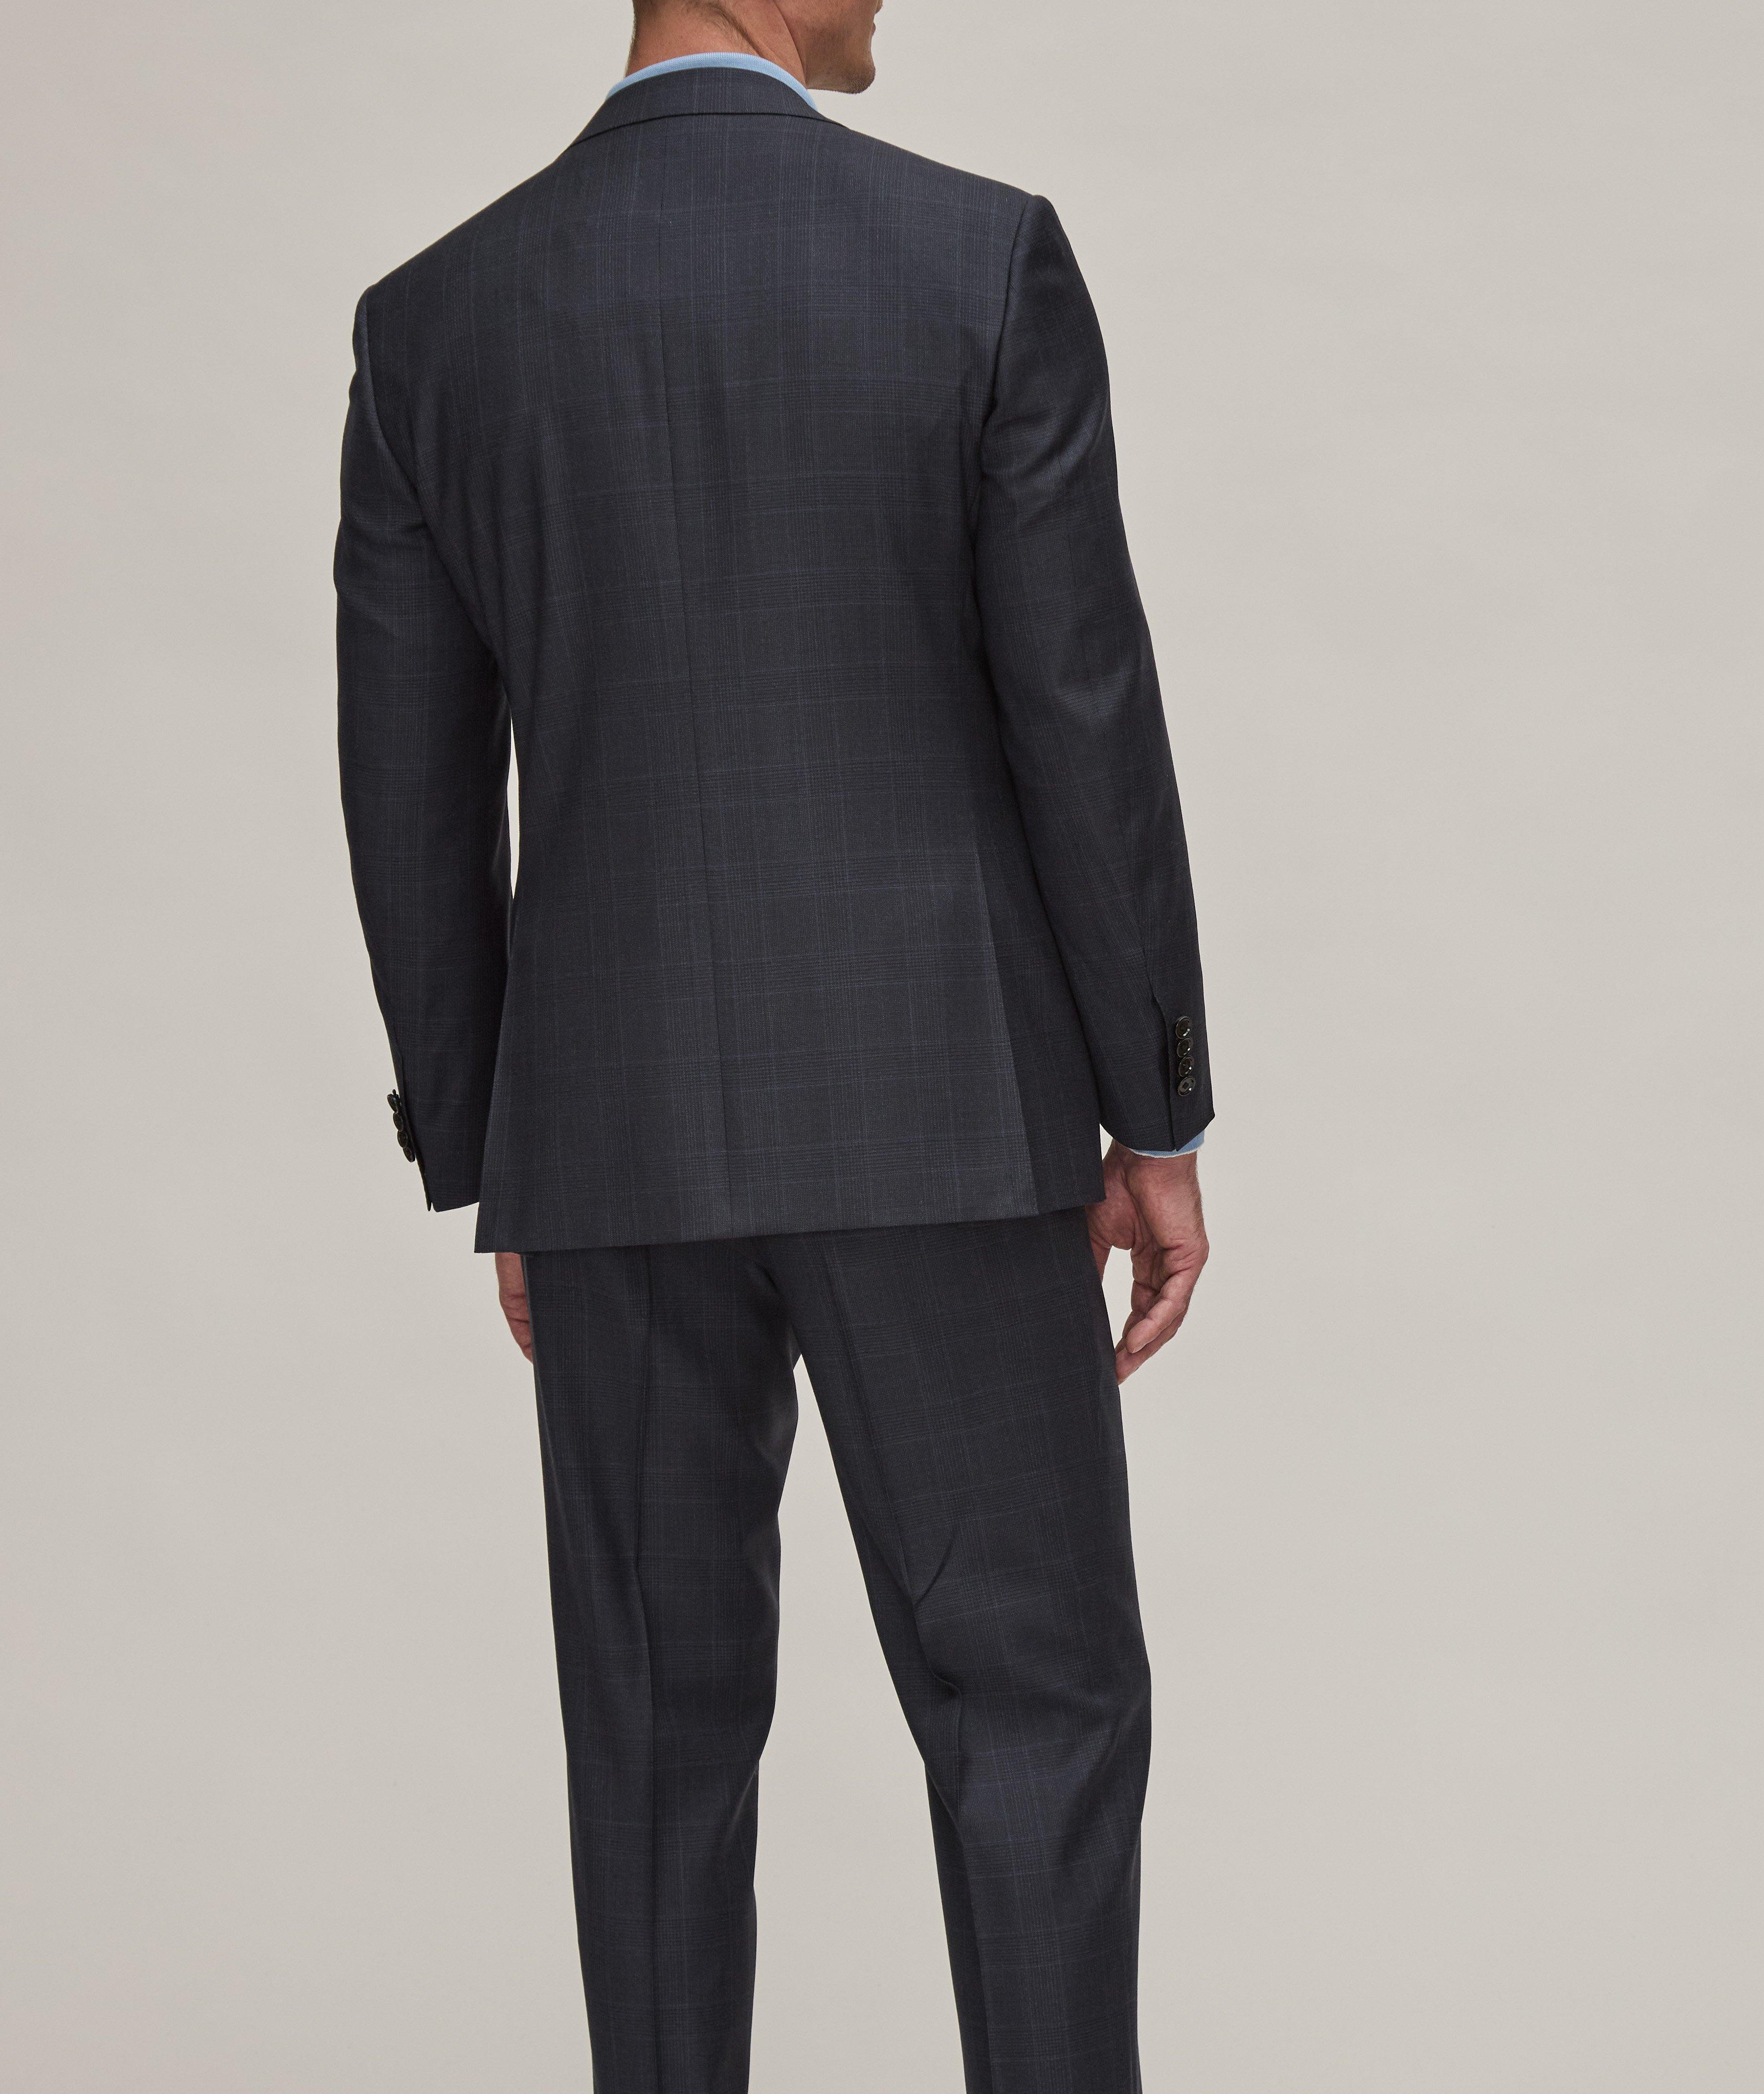 Contemporary Line Glen Check Wool Suit image 2